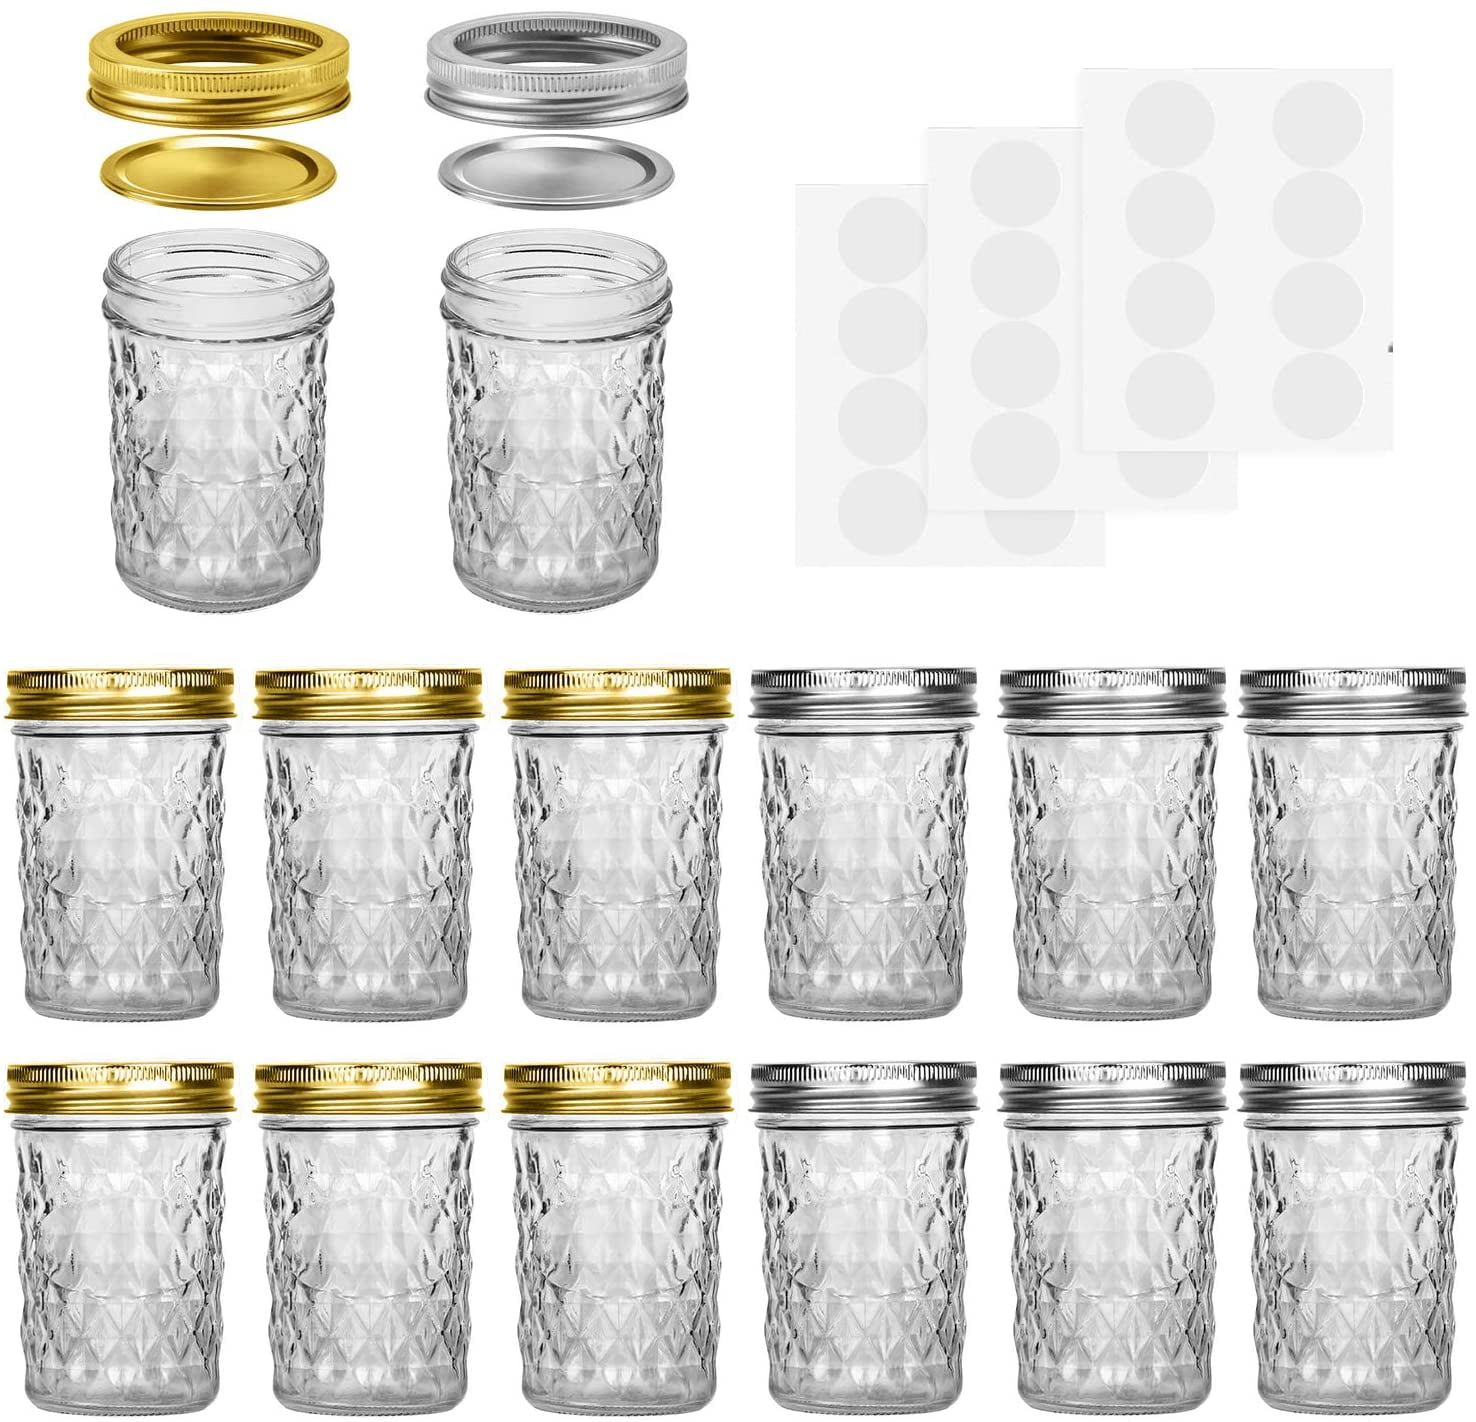 Details about   New Canning Jar Lifter-Display-Home-Farm-Kitchen-Mason & Ball Jars-Jelly-Jam!!! 